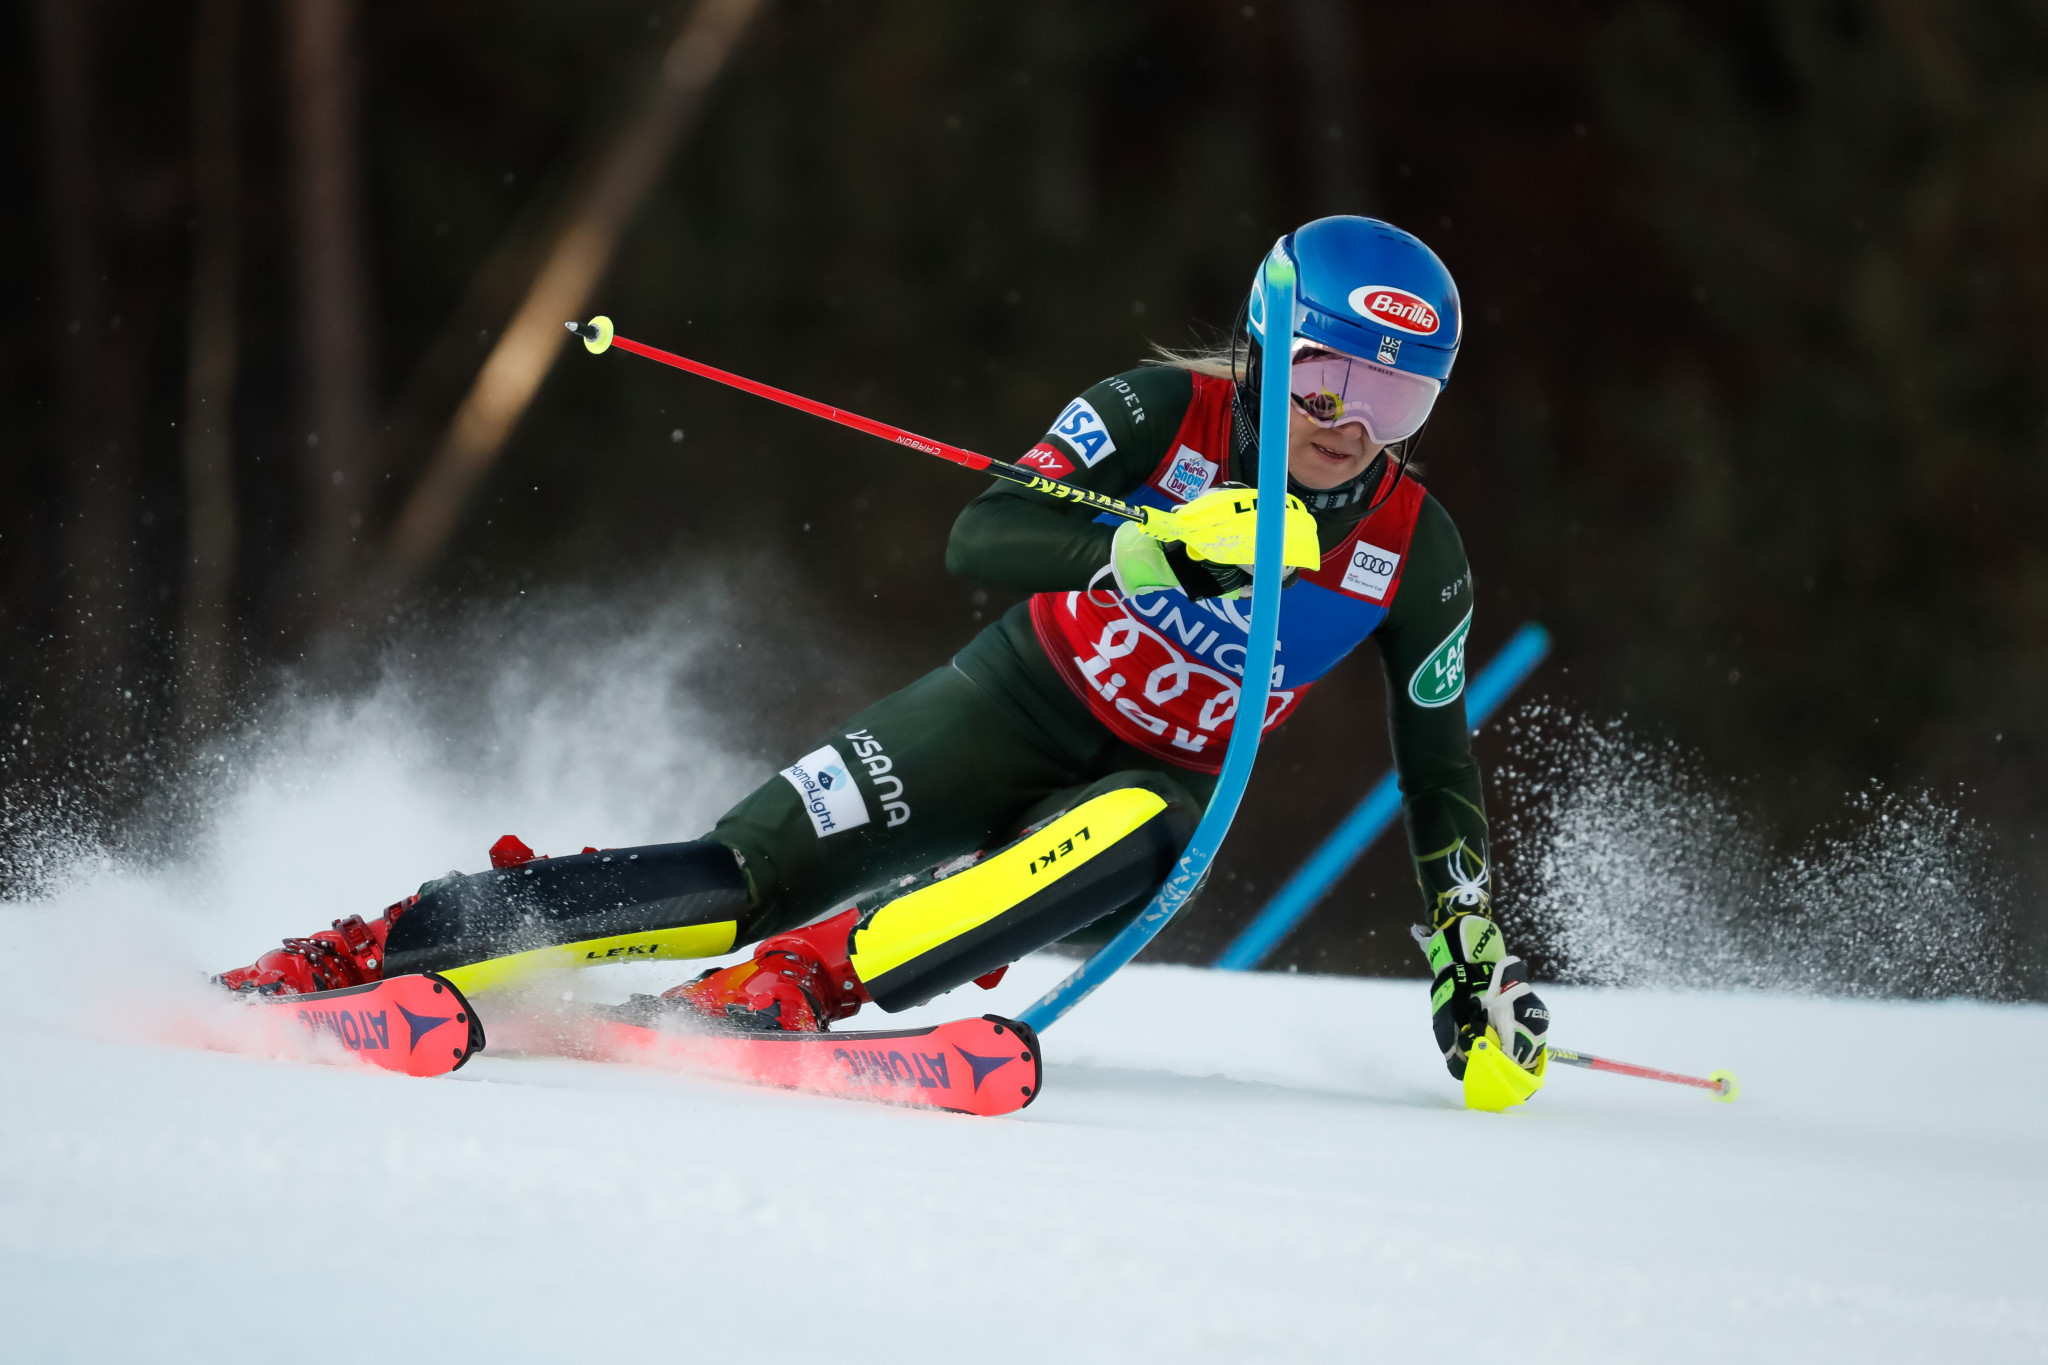 Shiffrin makes it back-to-back victories at FIS Alpine Ski World Cup in Lienz